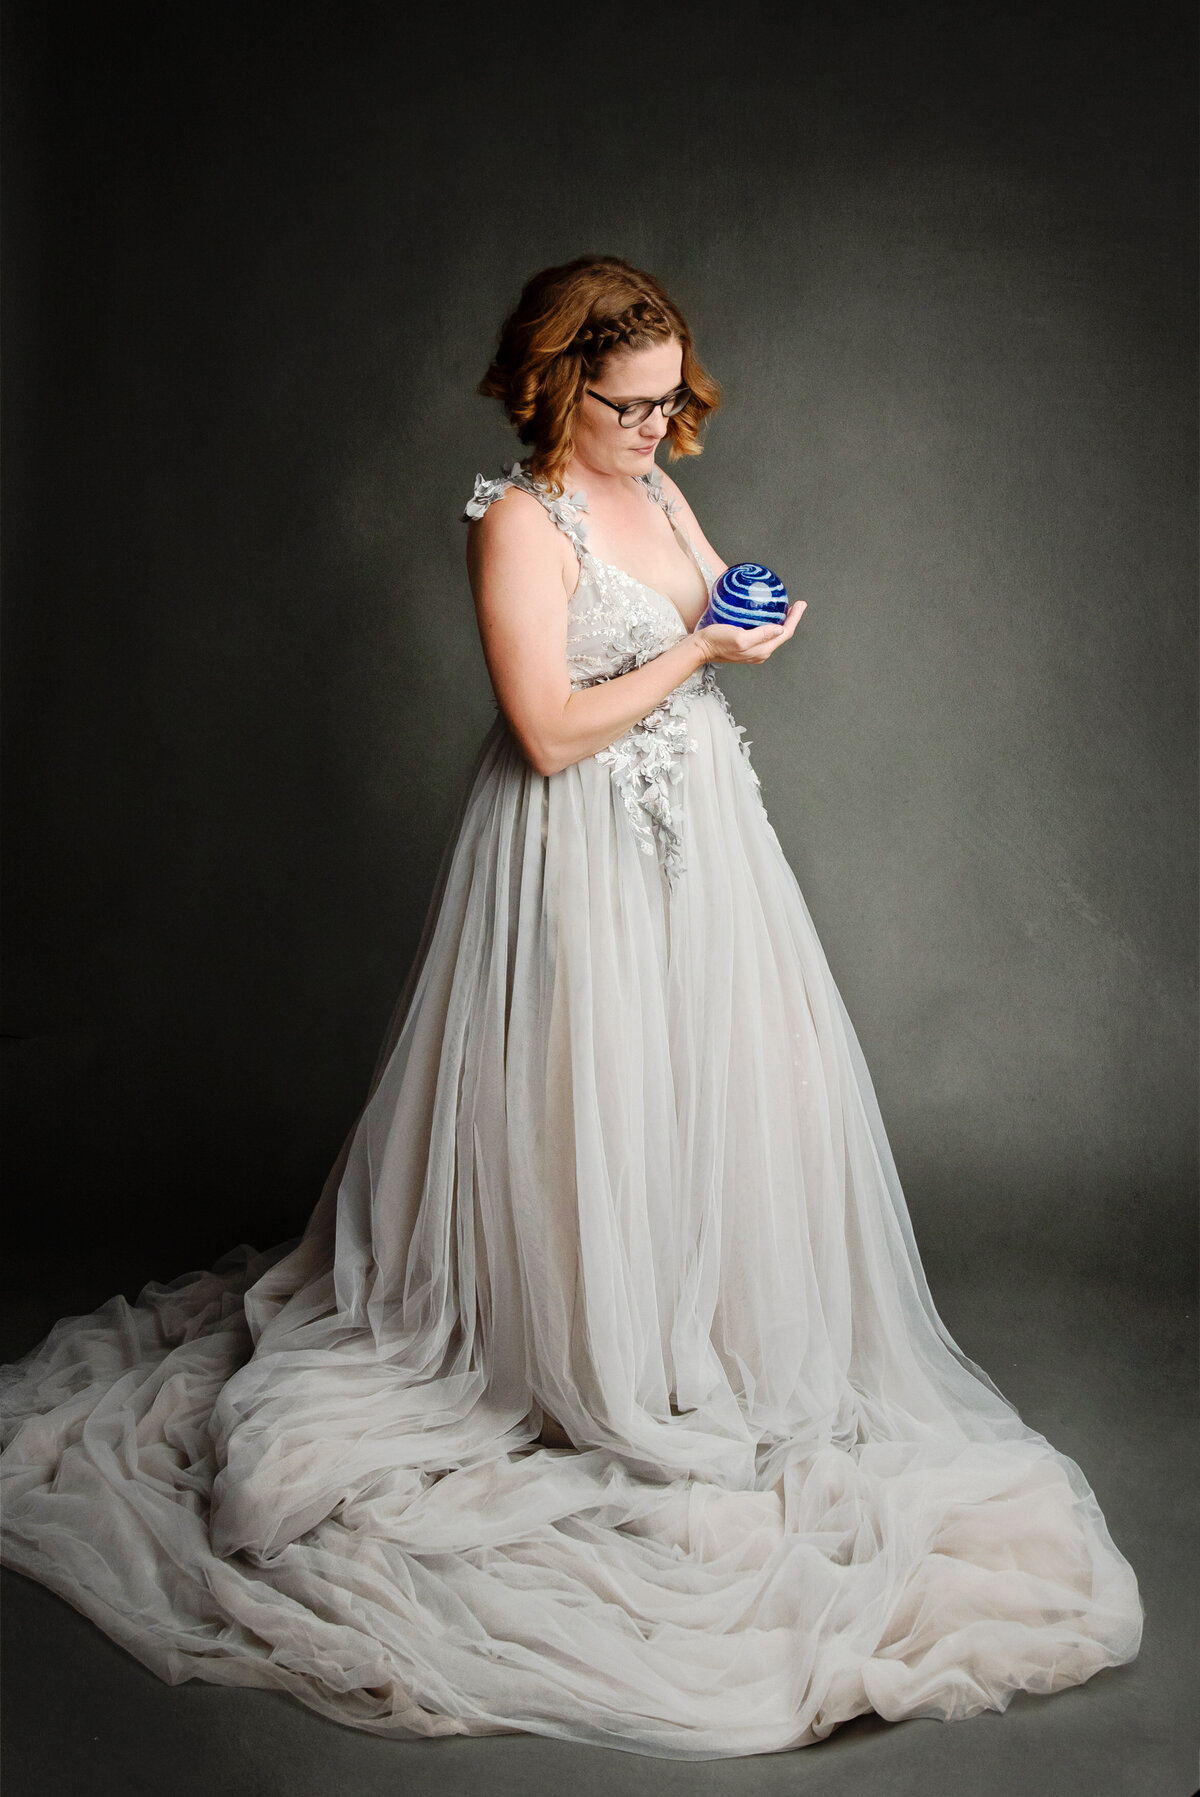 st-louis-motherhood-photographer-mom-in-flowy-silver-gown-holding-blue-and-white-glass-ball-against-gray-background